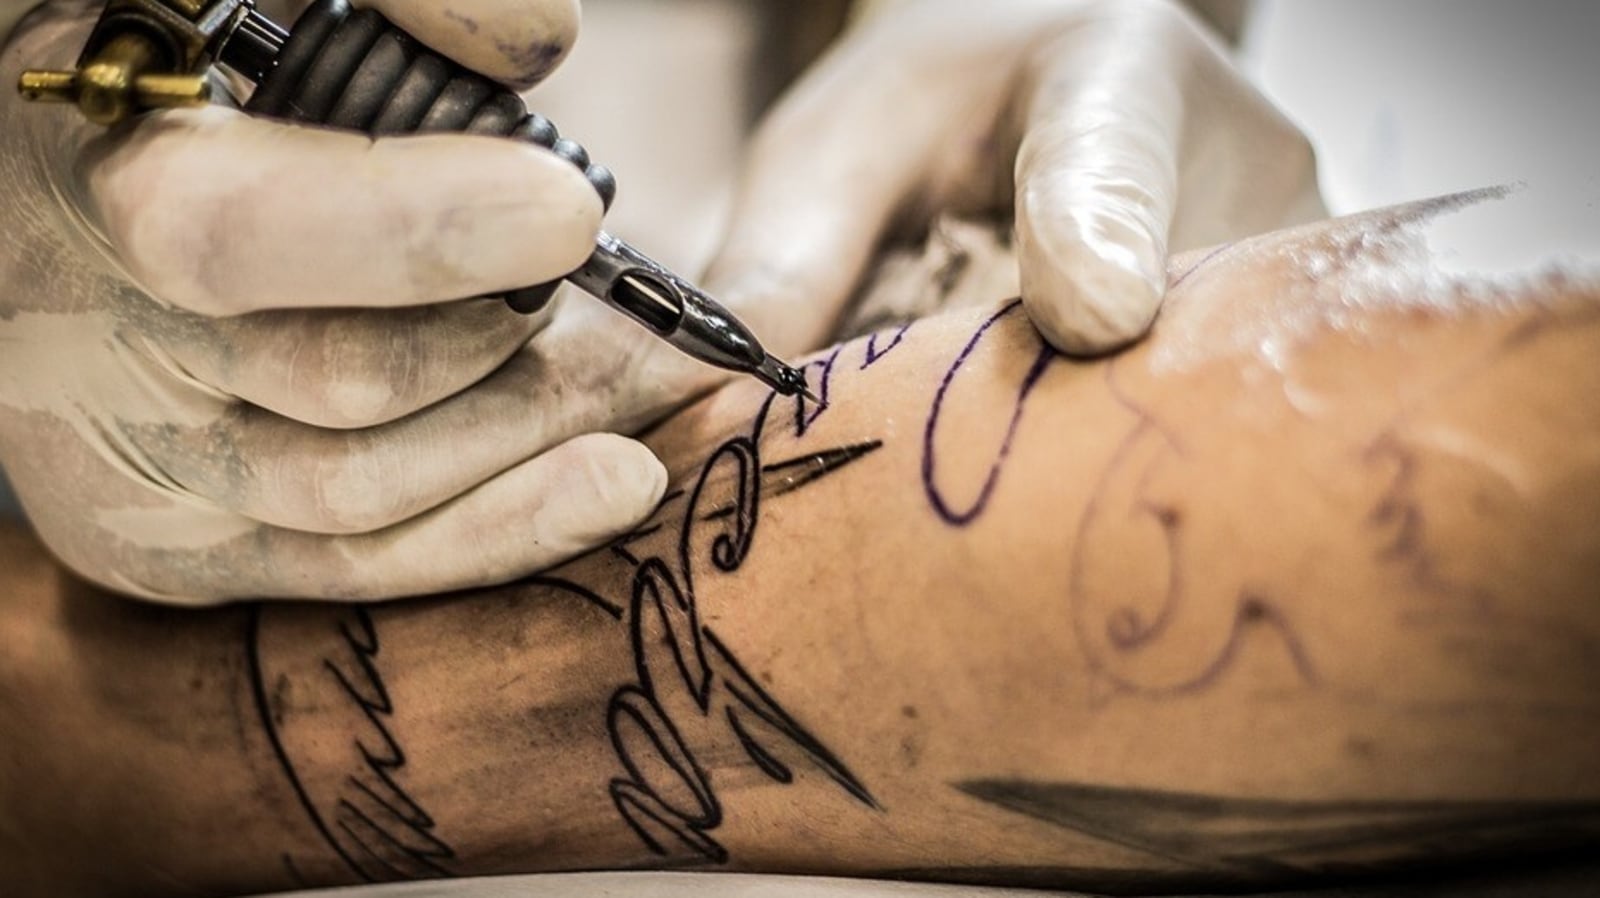 Tattoo pigments transported to lymph nodes corpses show  CBC News